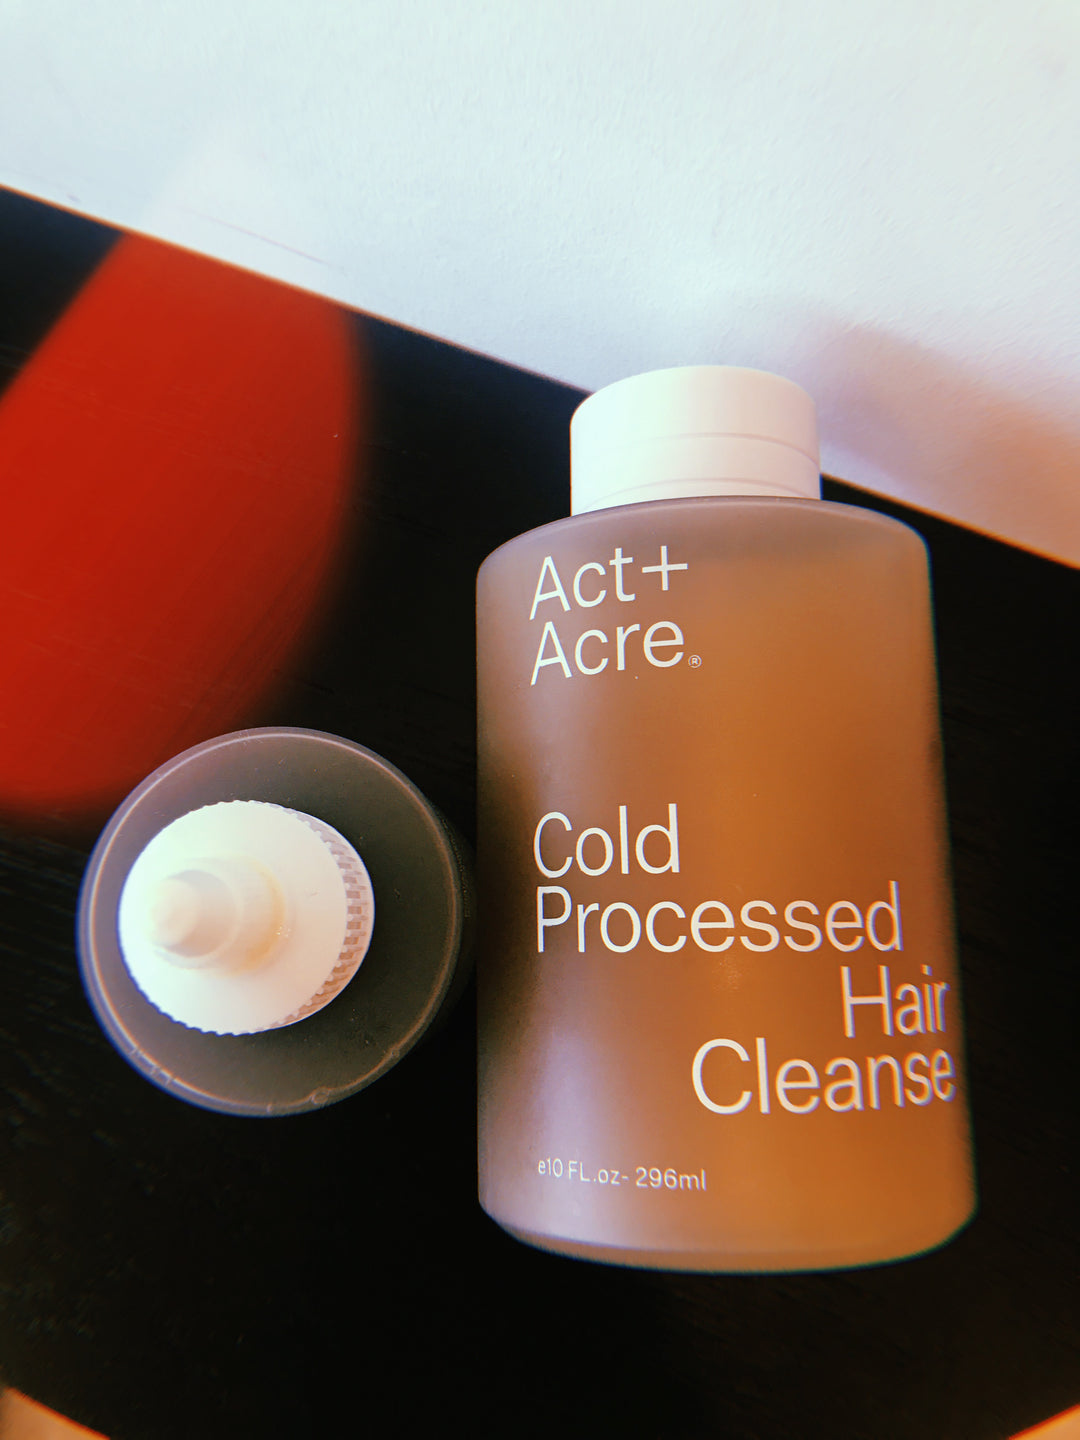 Twentyseven Toronto - Act + Acre Cold Pressed Hair Cleanse - Full Size (296ml)